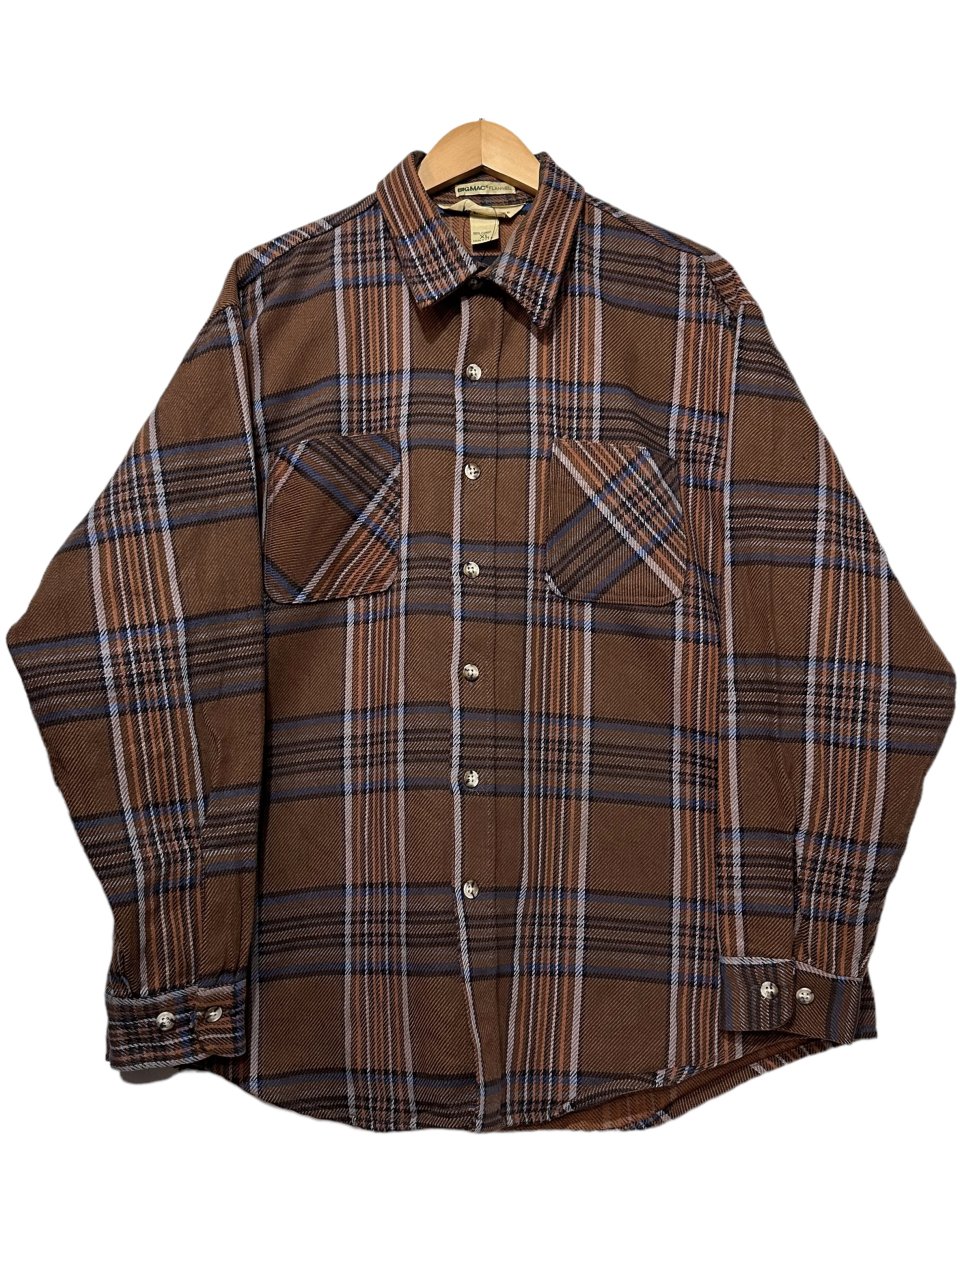 USA製 90s ST JOHN'S BAY Check Flannel L/S Shirt 茶 XL セント ...